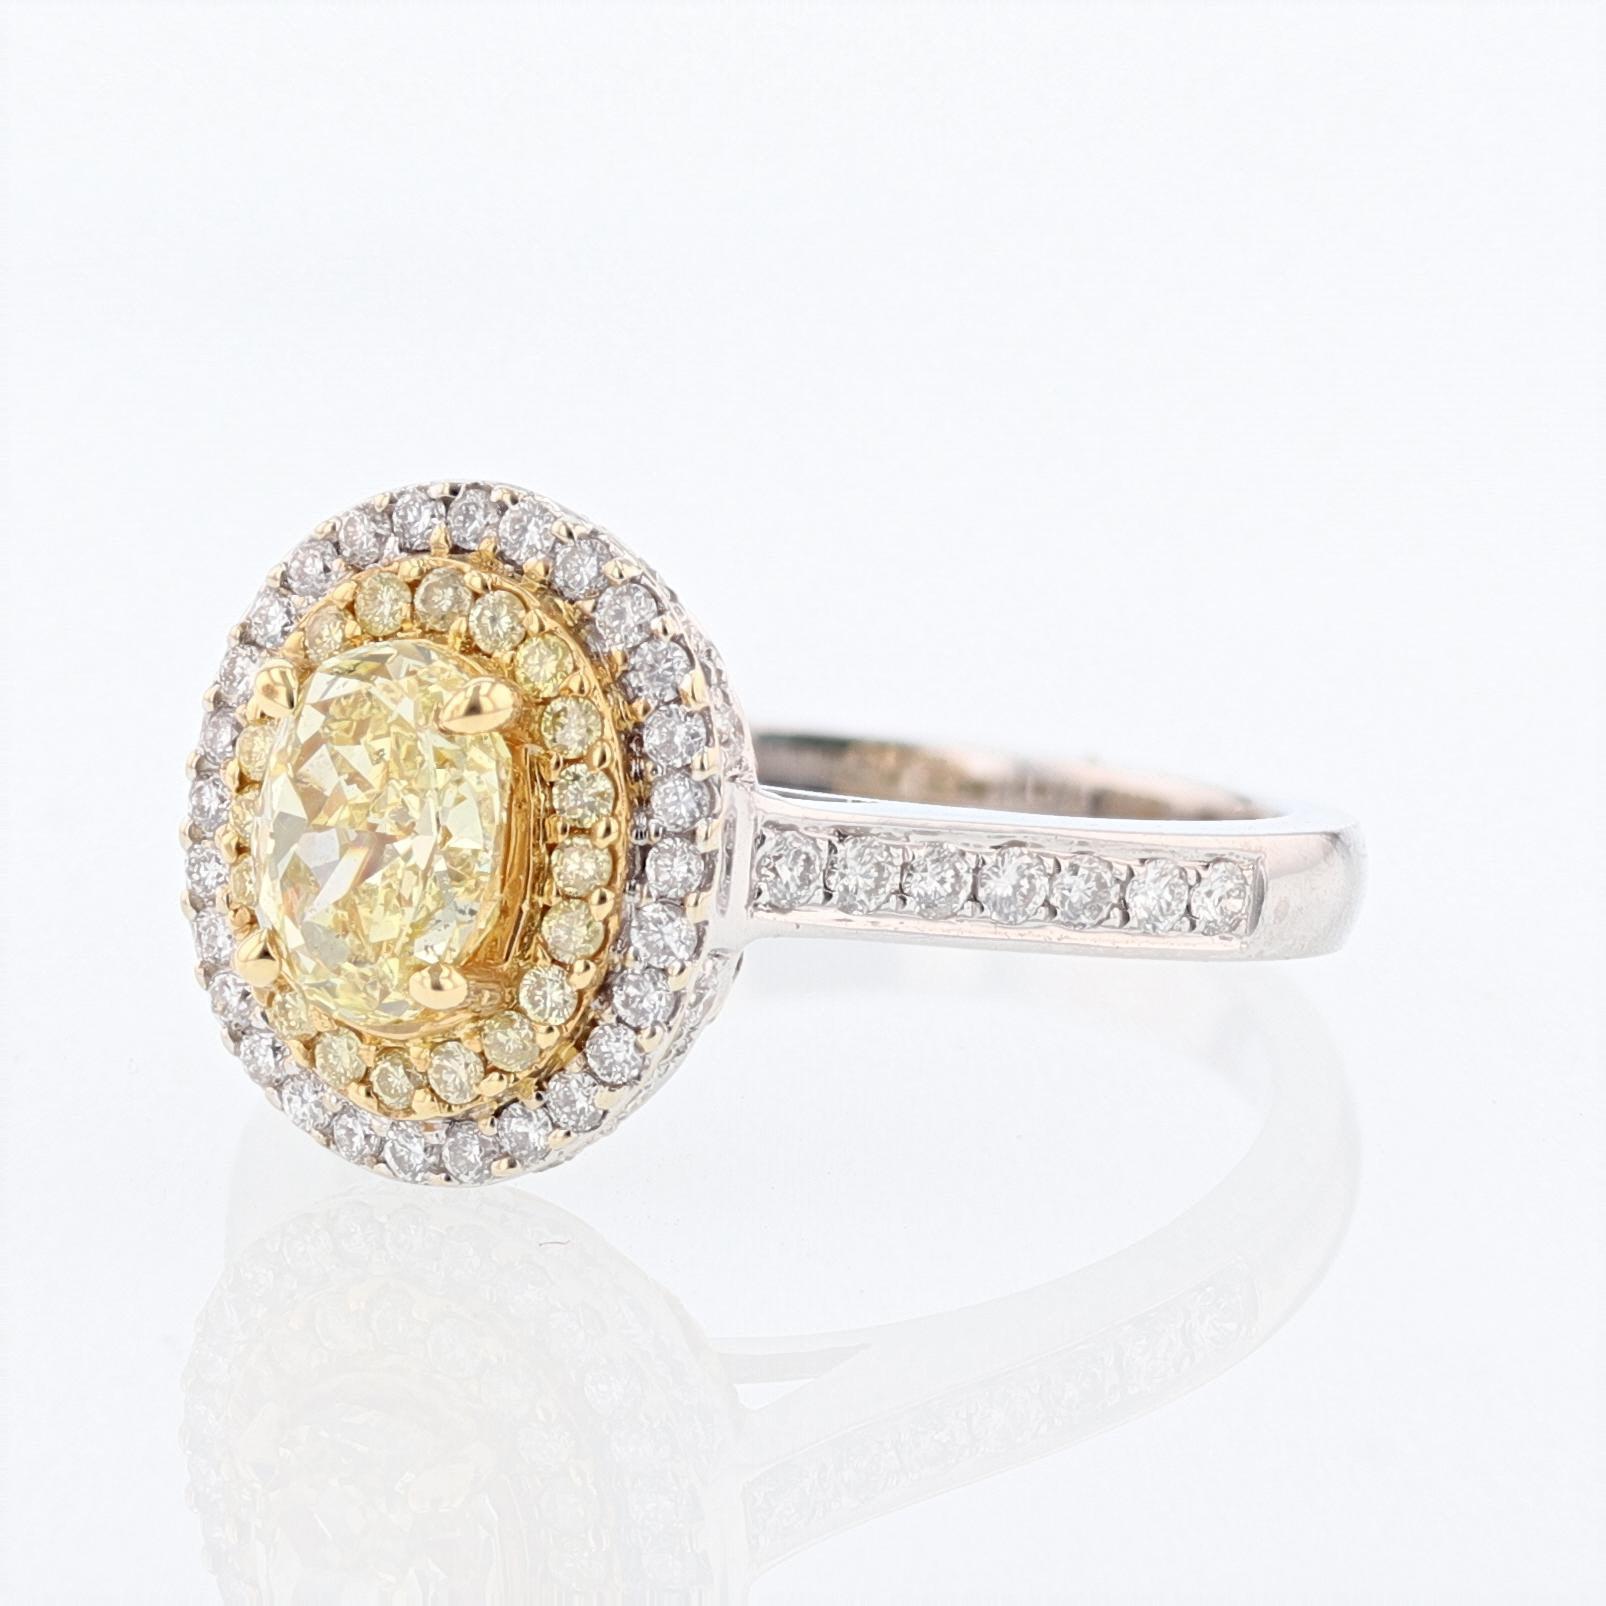 This ring is made in 18 karat white and yellow gold with featuring 
 an oval cut yellow diamond and a double halo with yellow and white diamonds. The center diamond is a 1.01 carat GIA certified  Yellow oval shape diamond with a color grade (FLY, or